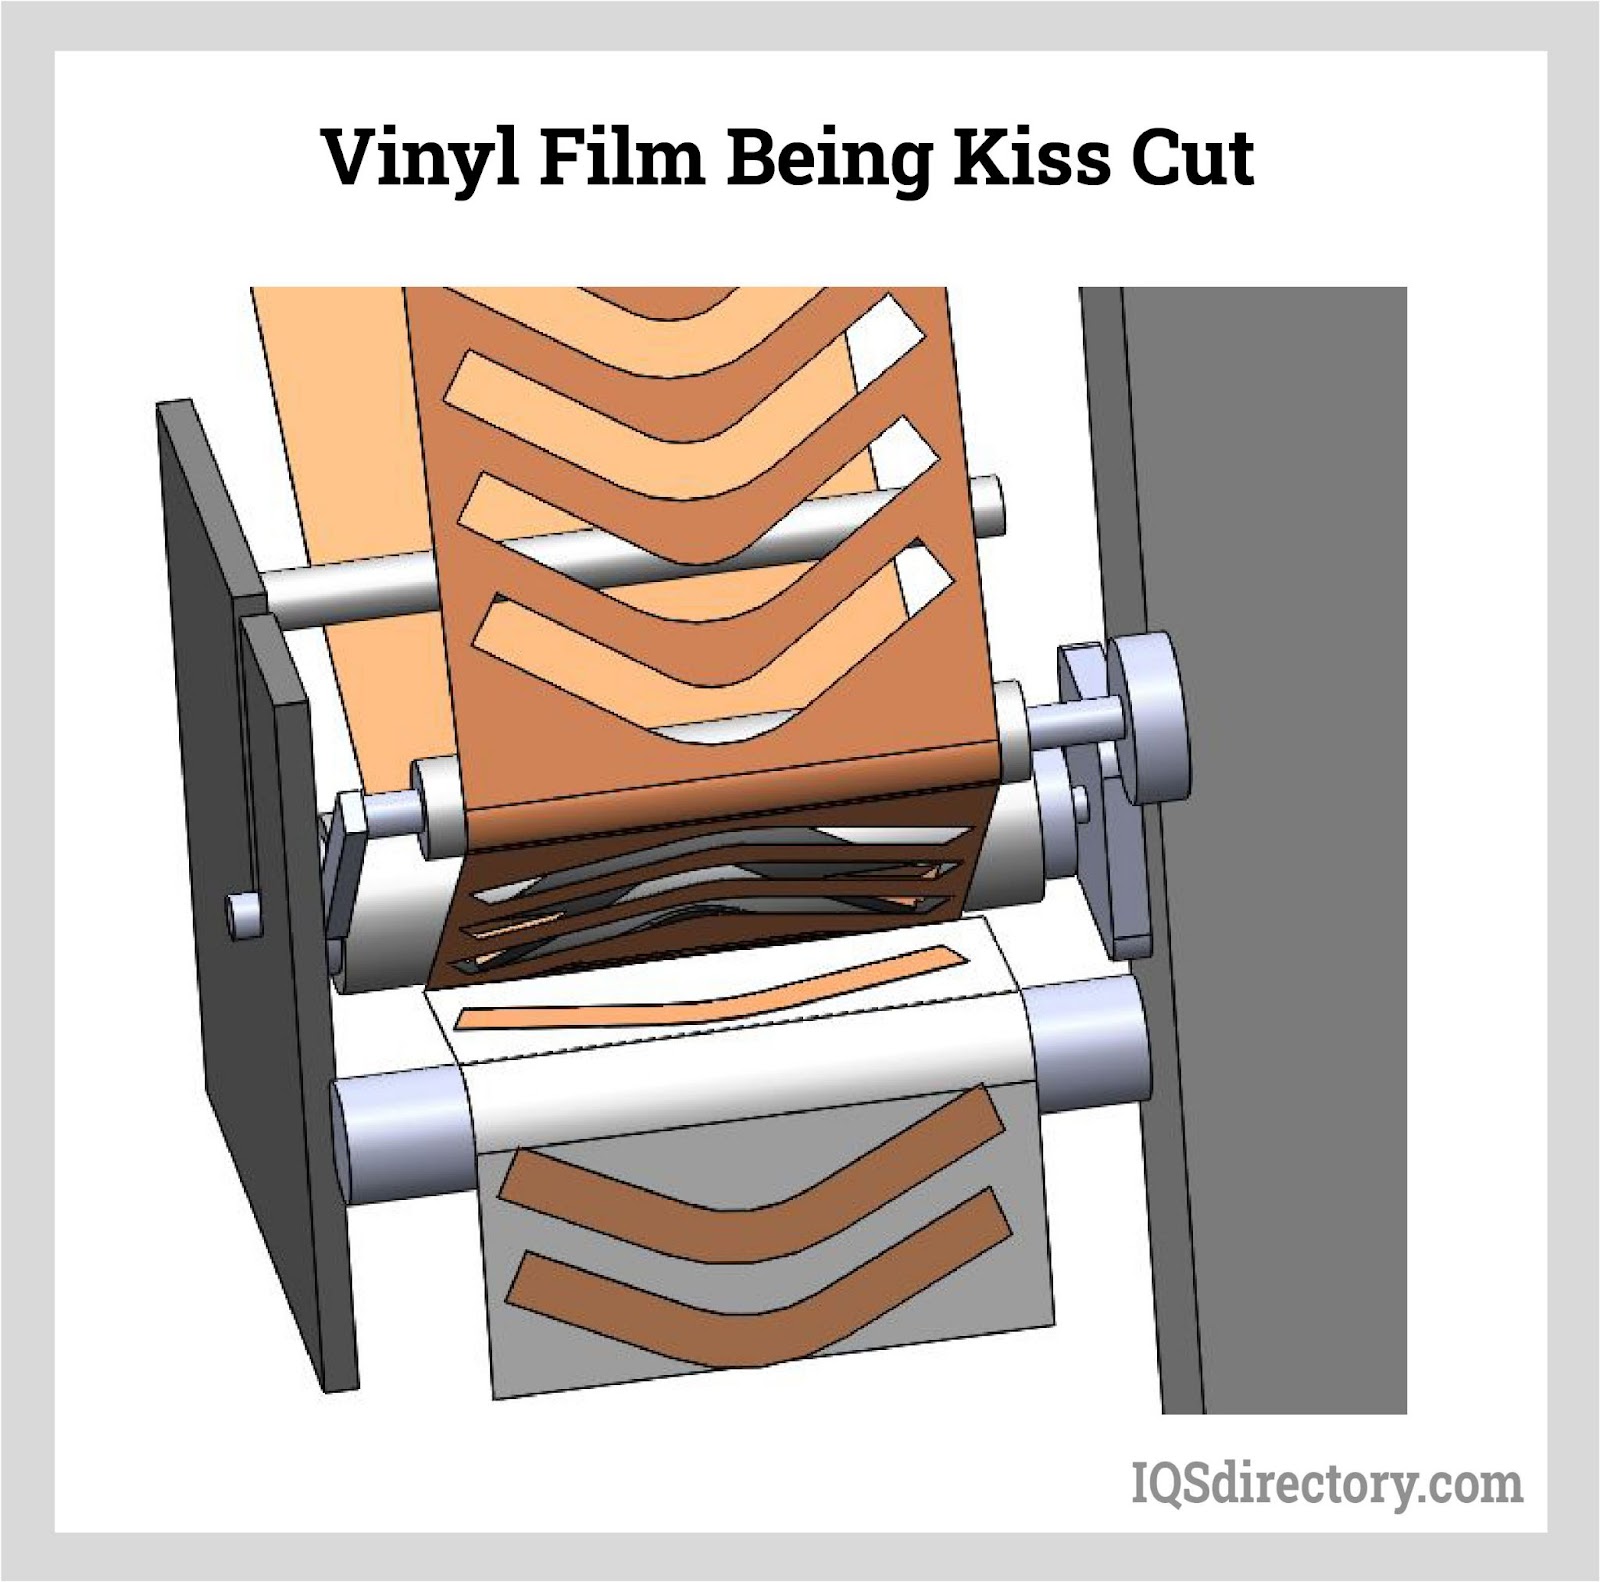 Kiss Cutting: What Is It? How Does It Work? Types, Products